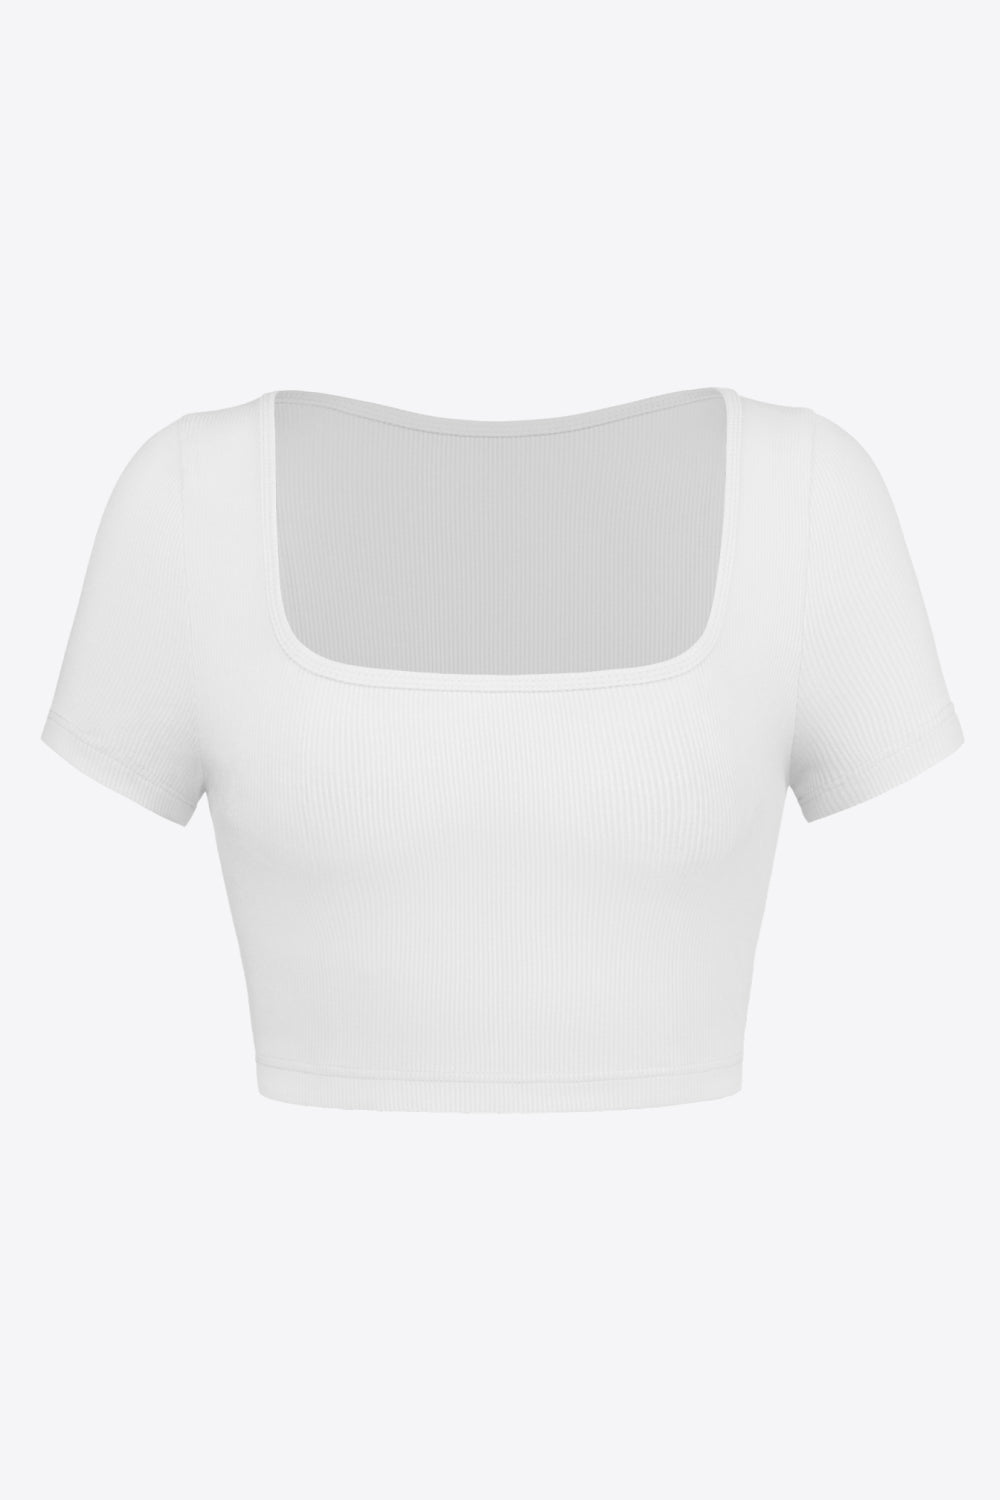 Root Ribbed Crop Top in Black, Sage, Khaki, and White